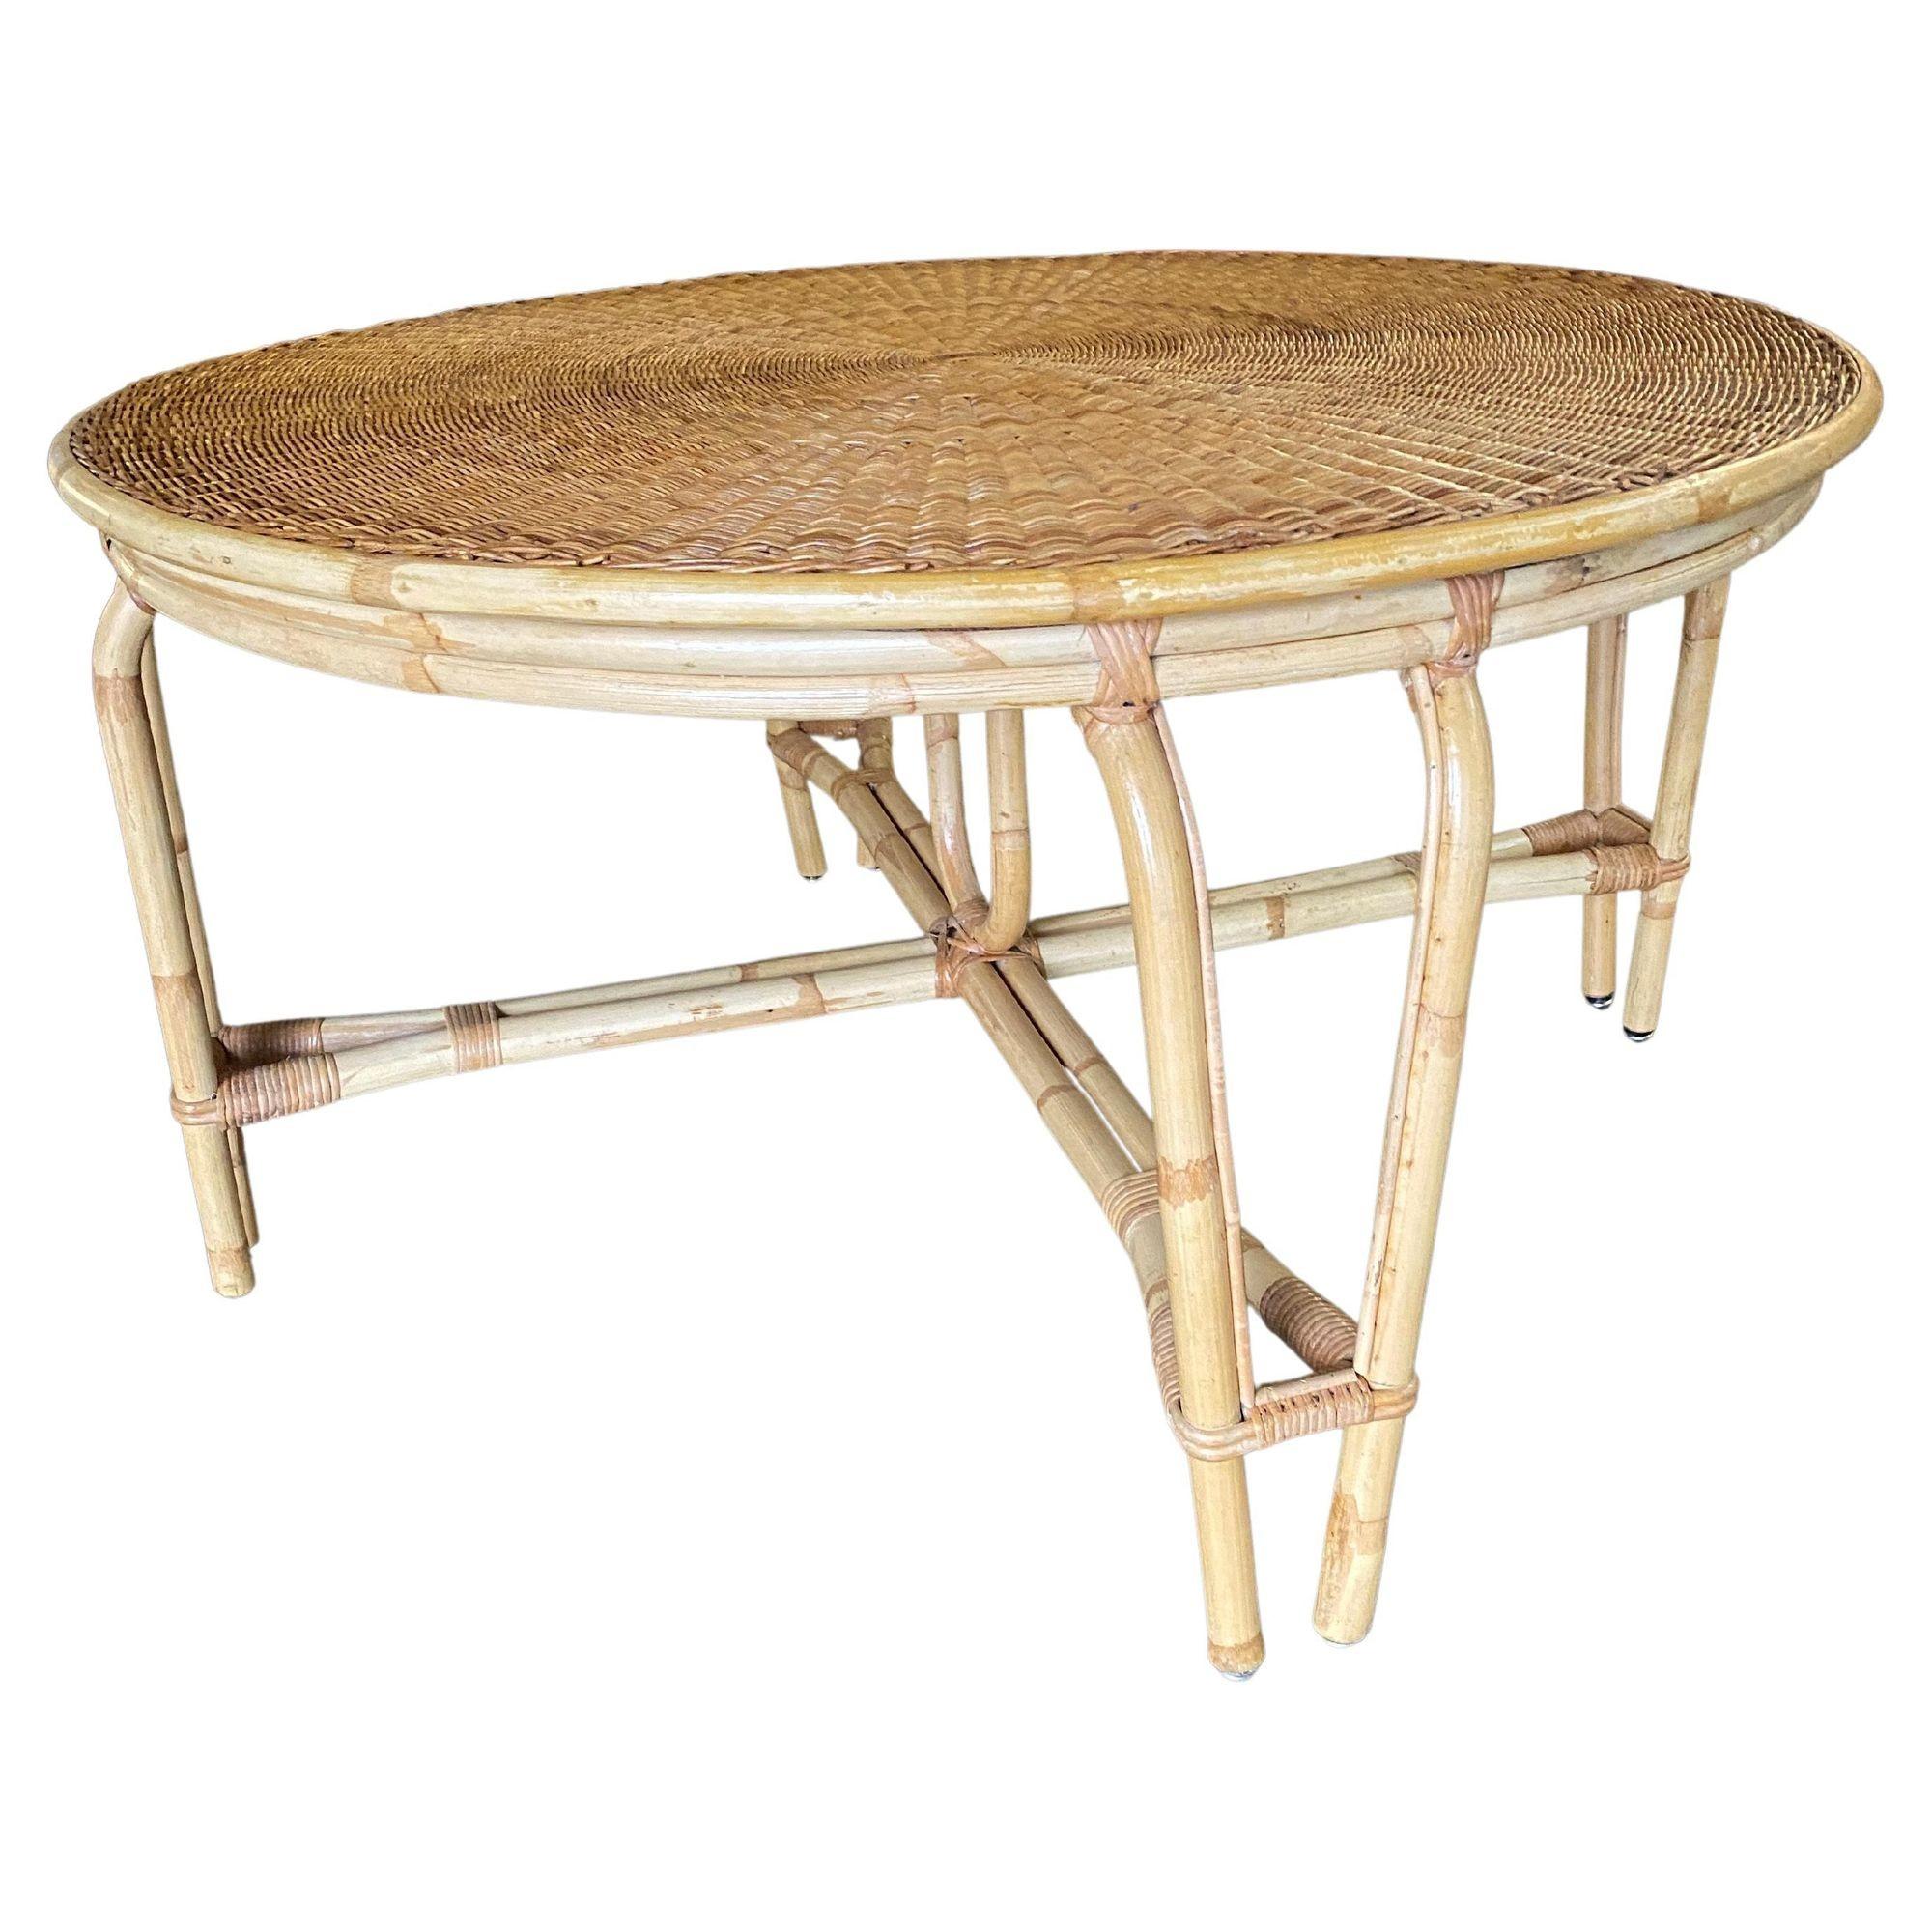 American Round Wicker Top Rattan Table with Matching Stools Dining Set For Sale